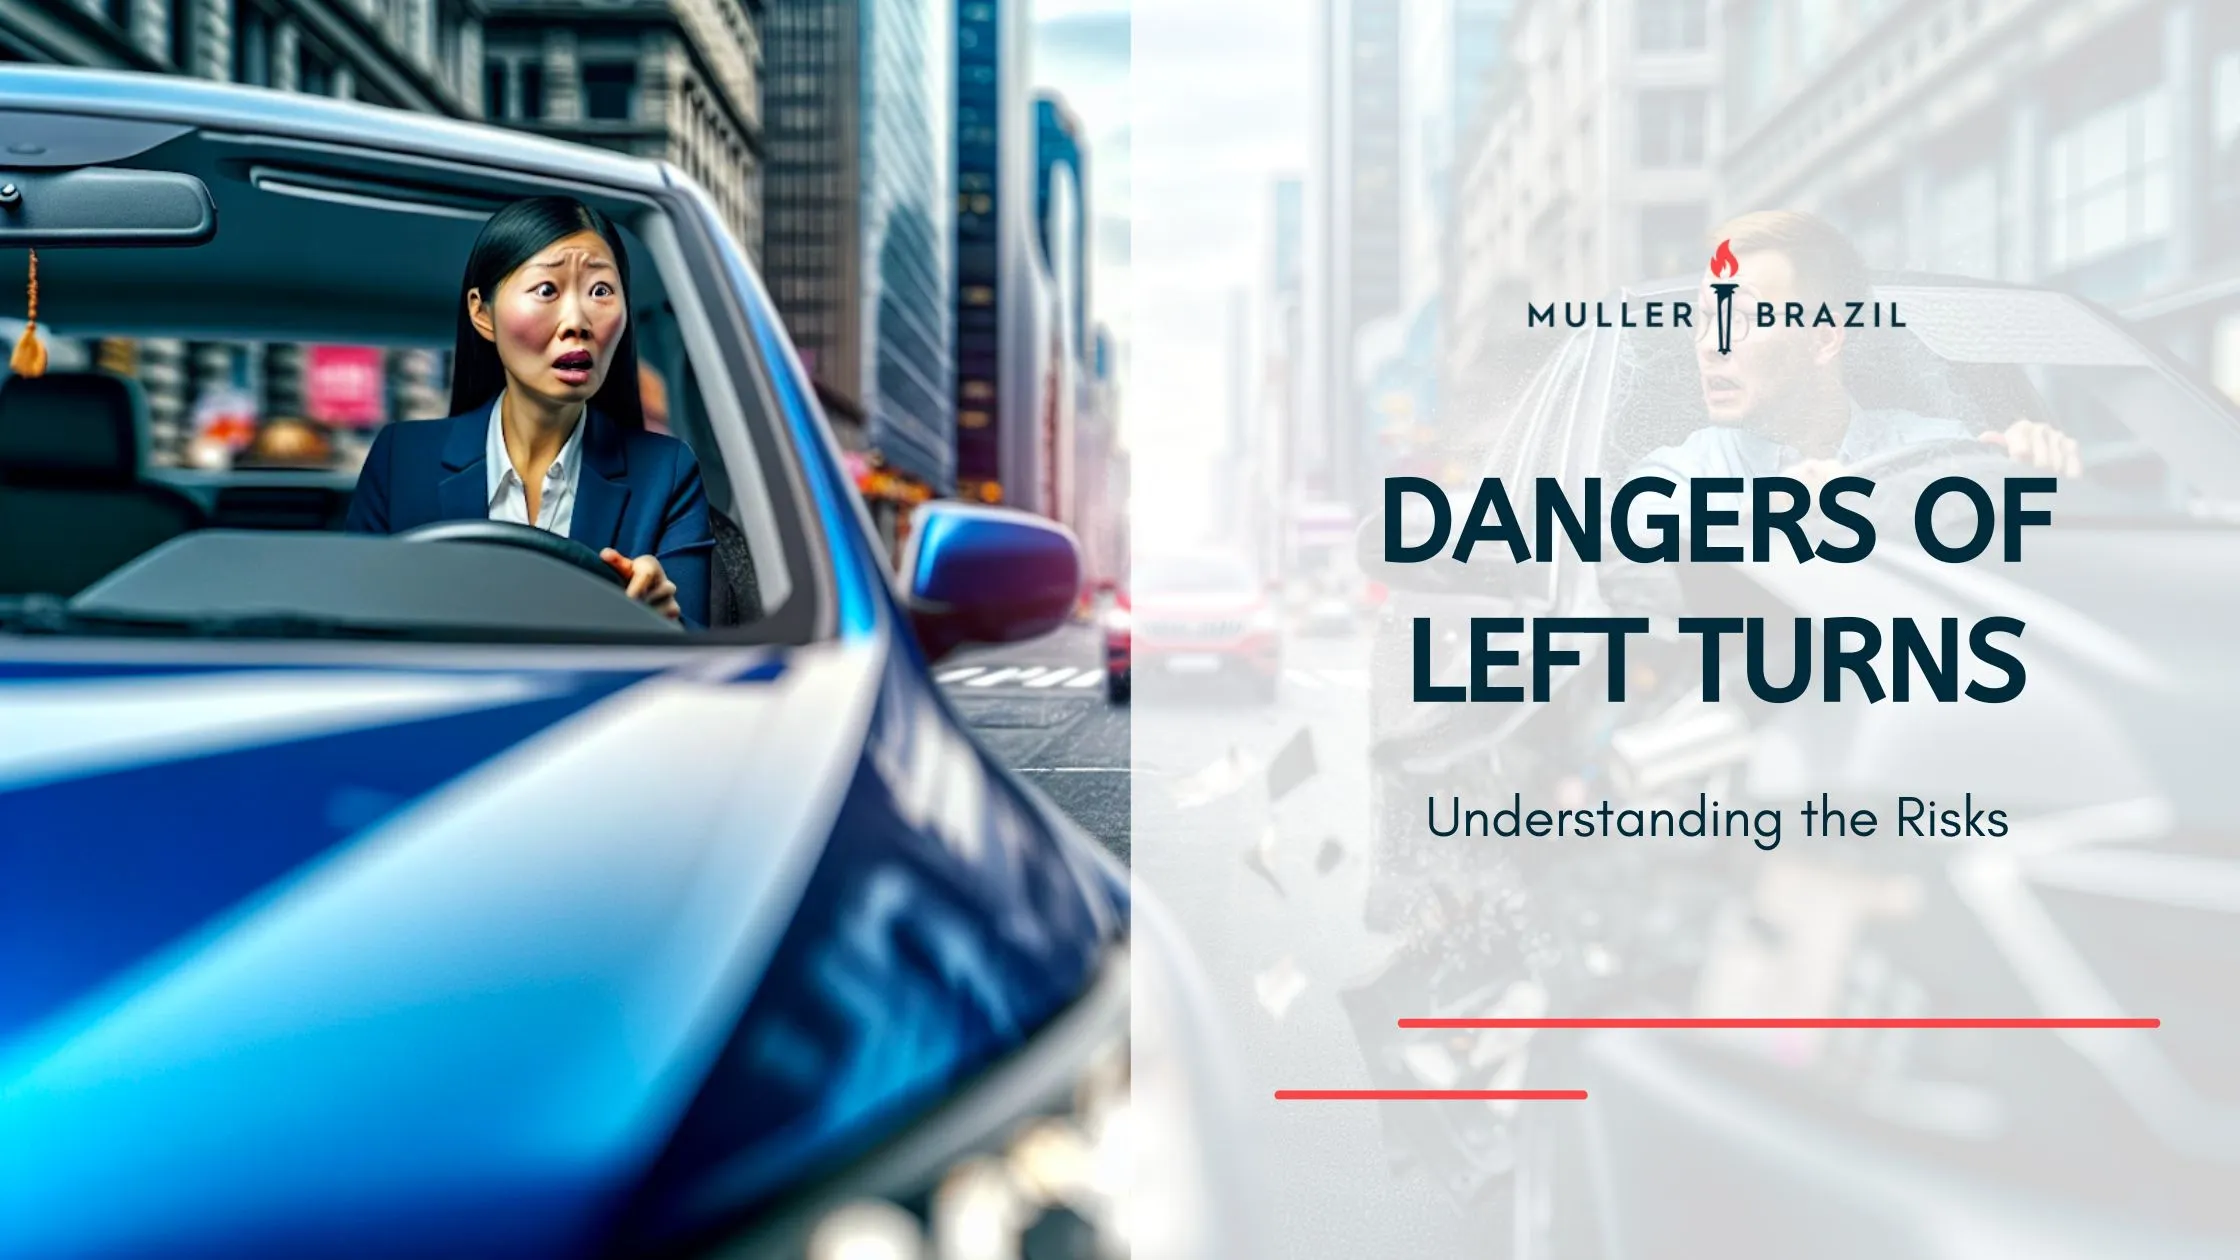 A concerned driver making a left turn across traffic, with 'DANGERS OF LEFT TURNS - Understanding the Risks' by Muller Brazil, emphasizing what makes a left turn across traffic dangerous.